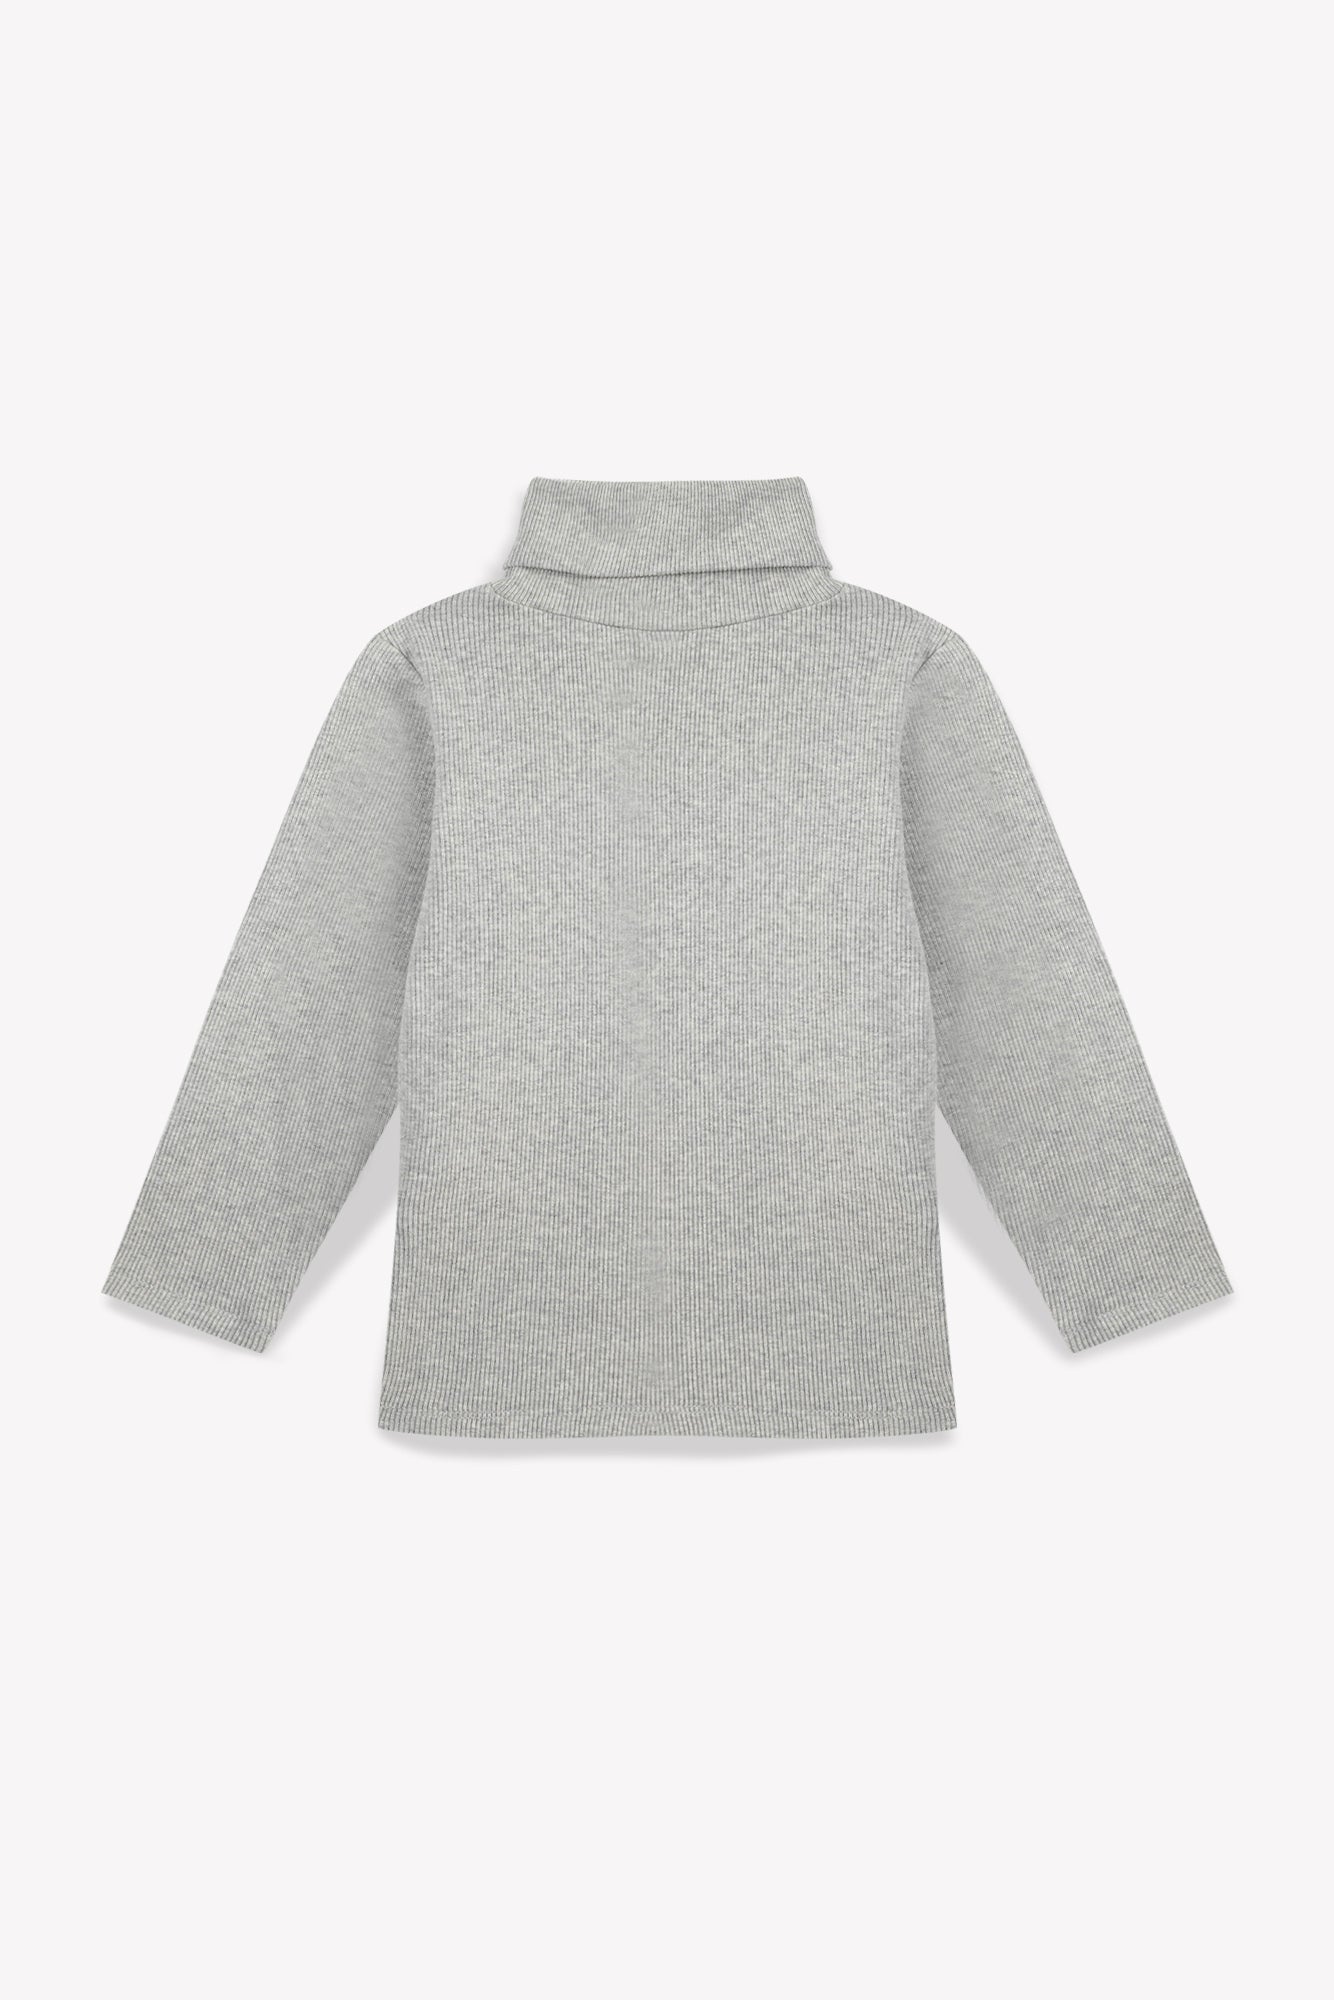 Collar - Rolled Titouv Grey In 100% organic cotton